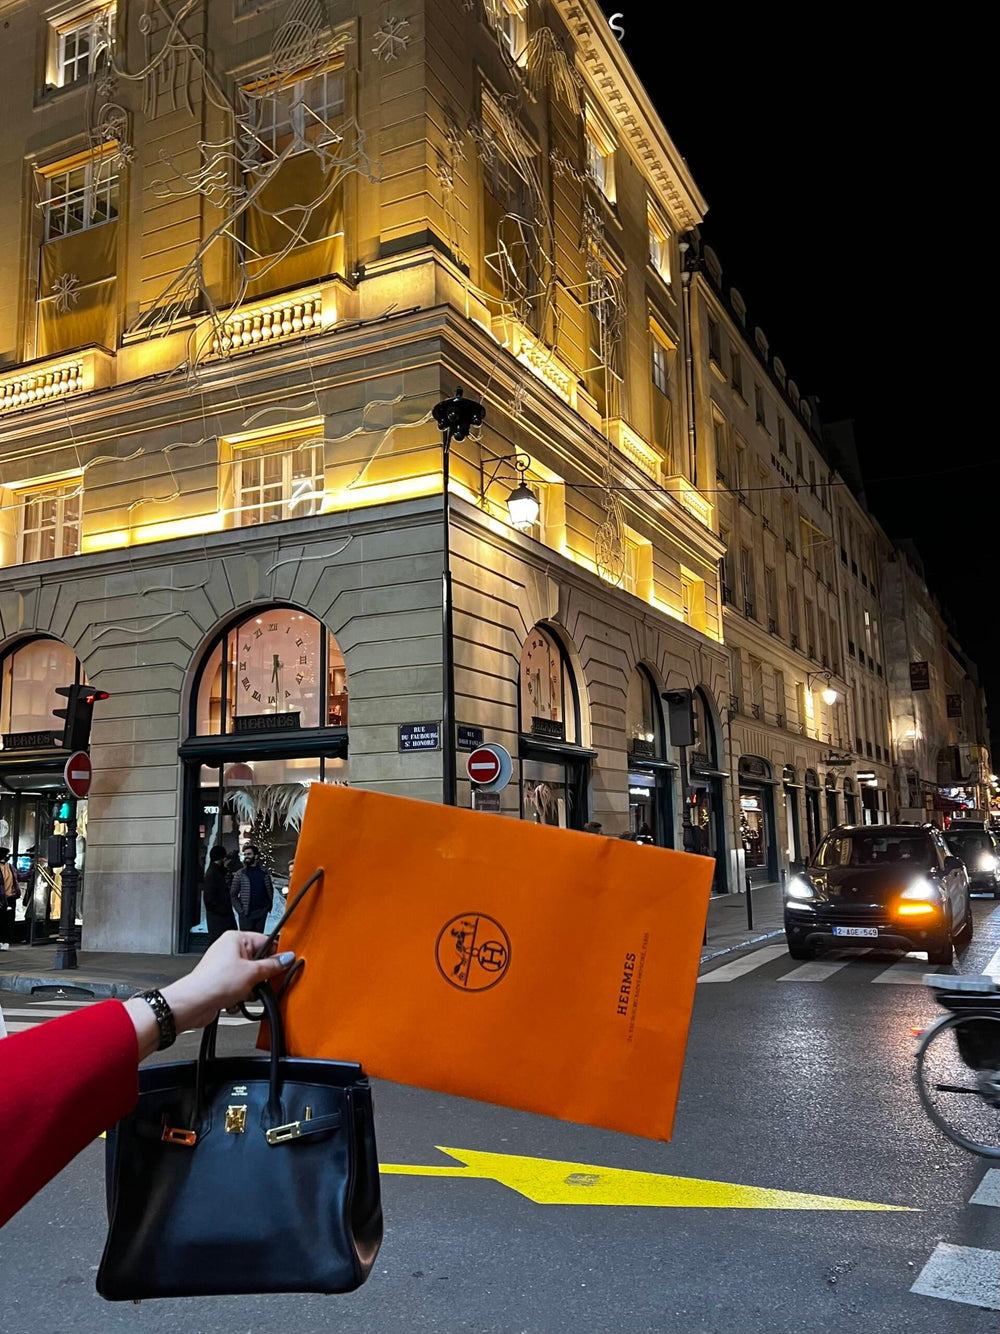 Hermès Prices Will Be Rising Even While Revenues Soar – Only Authentics